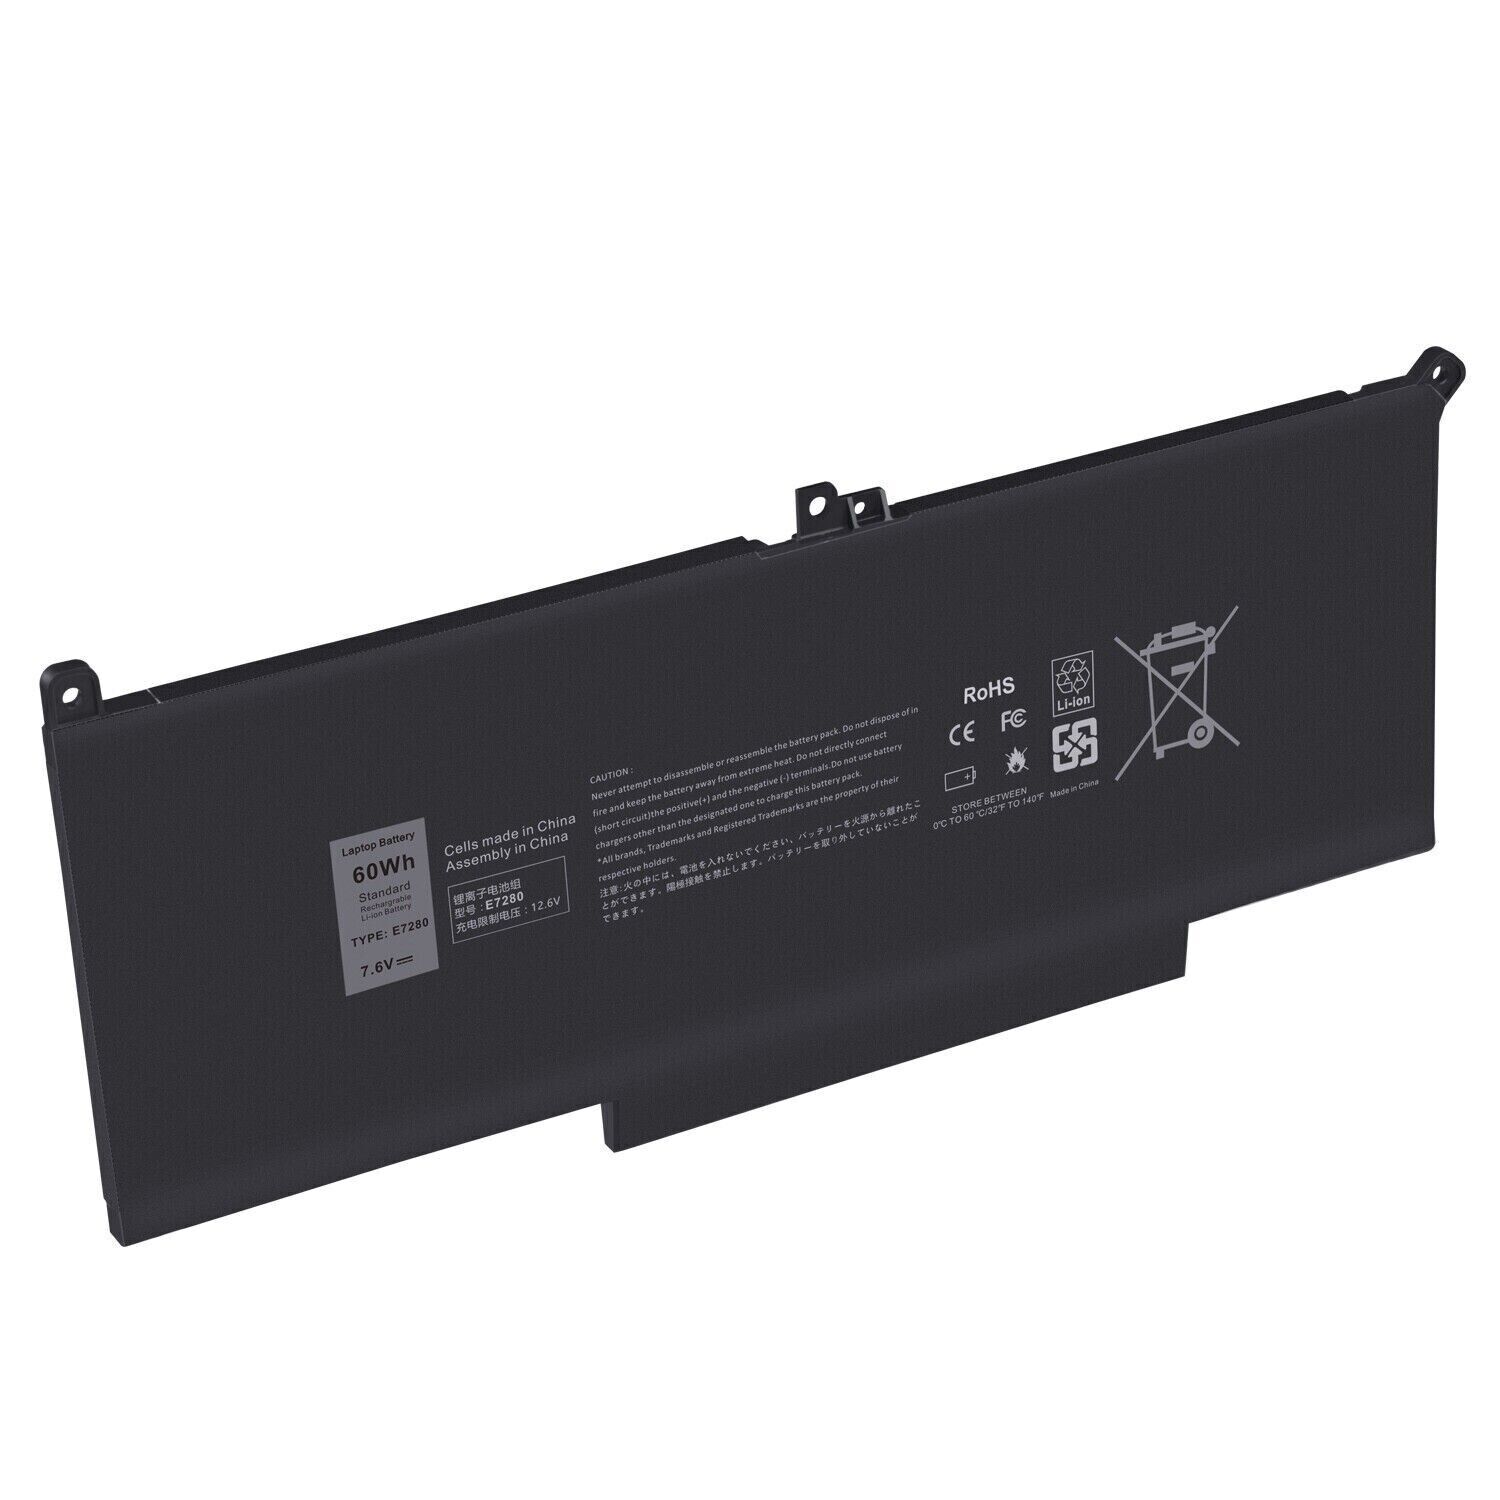 Lot 1-30 F3YGT Battery for Dell Latitude 14 7480 7490 12 7280 7290 13 7380 7390